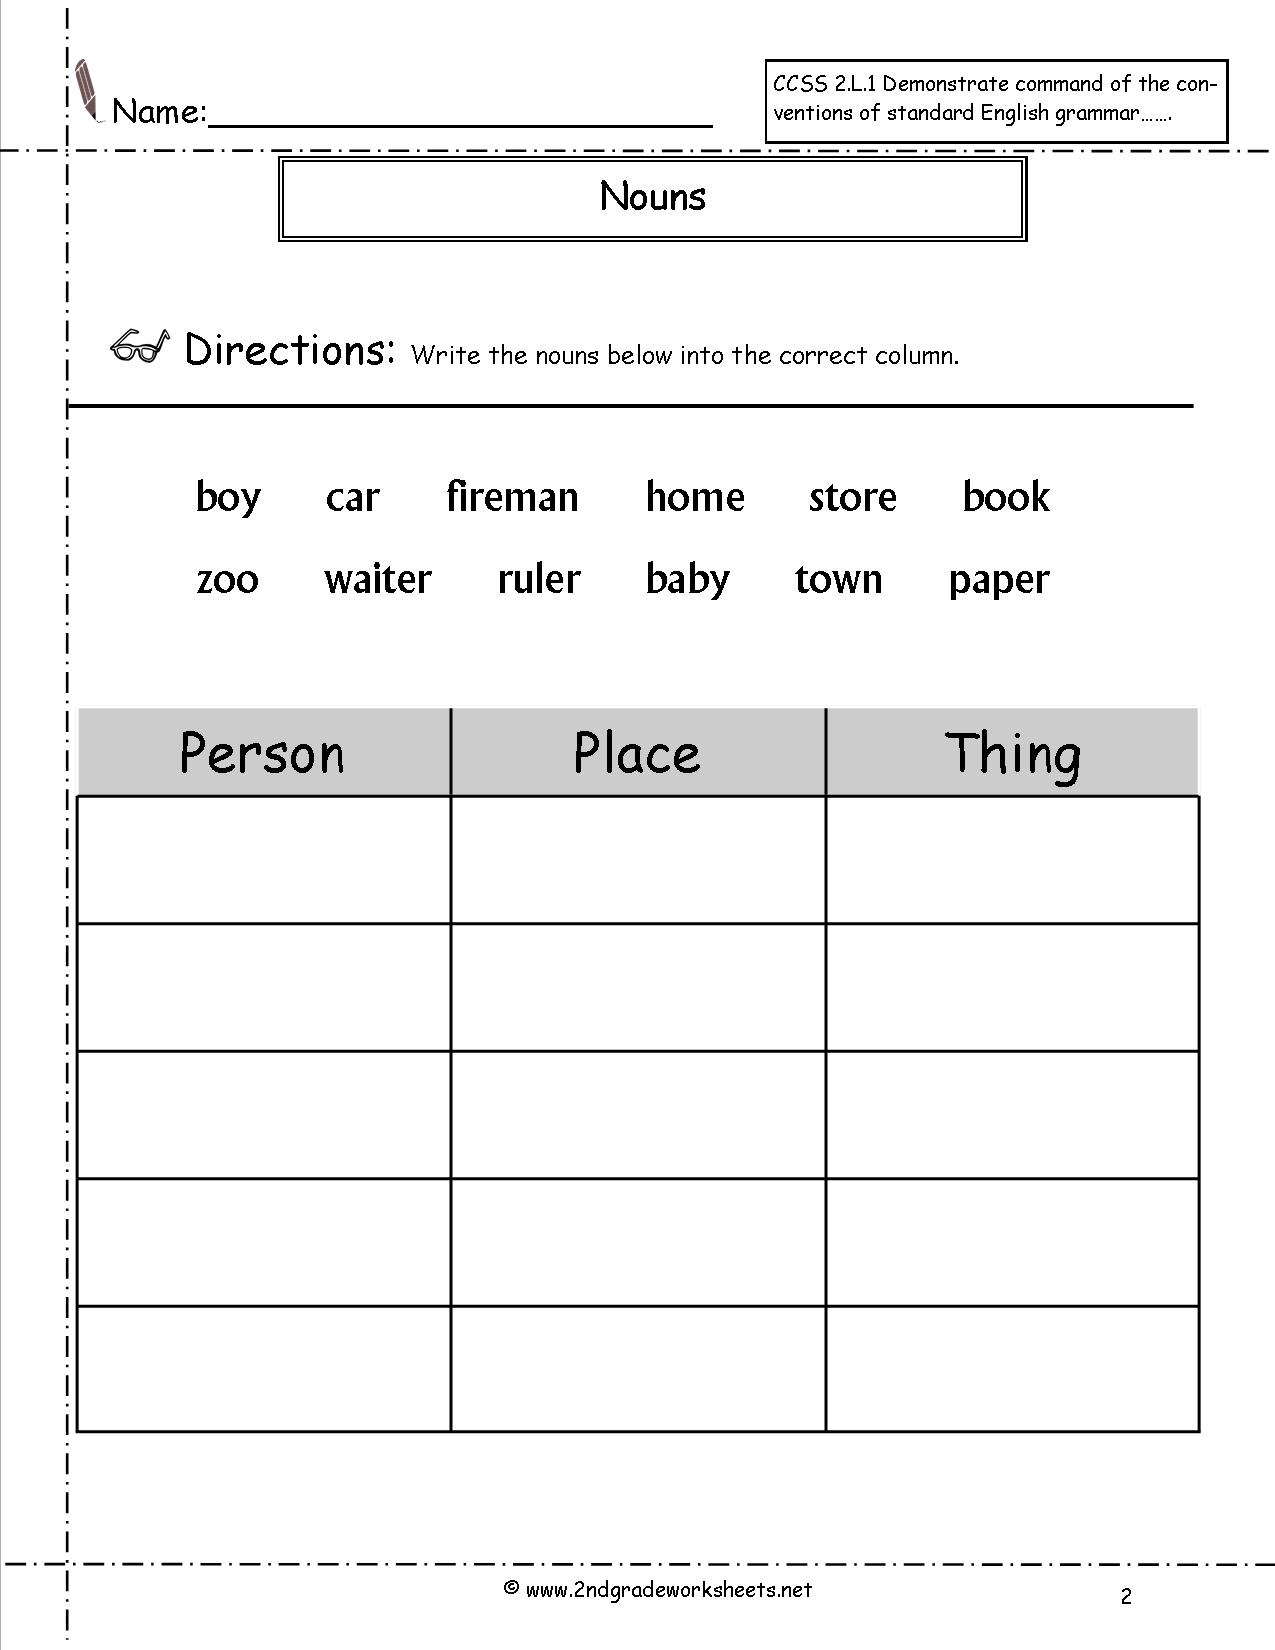 7-best-images-of-nouns-person-place-or-thing-worksheet-nouns-worksheets-2nd-grade-possessive